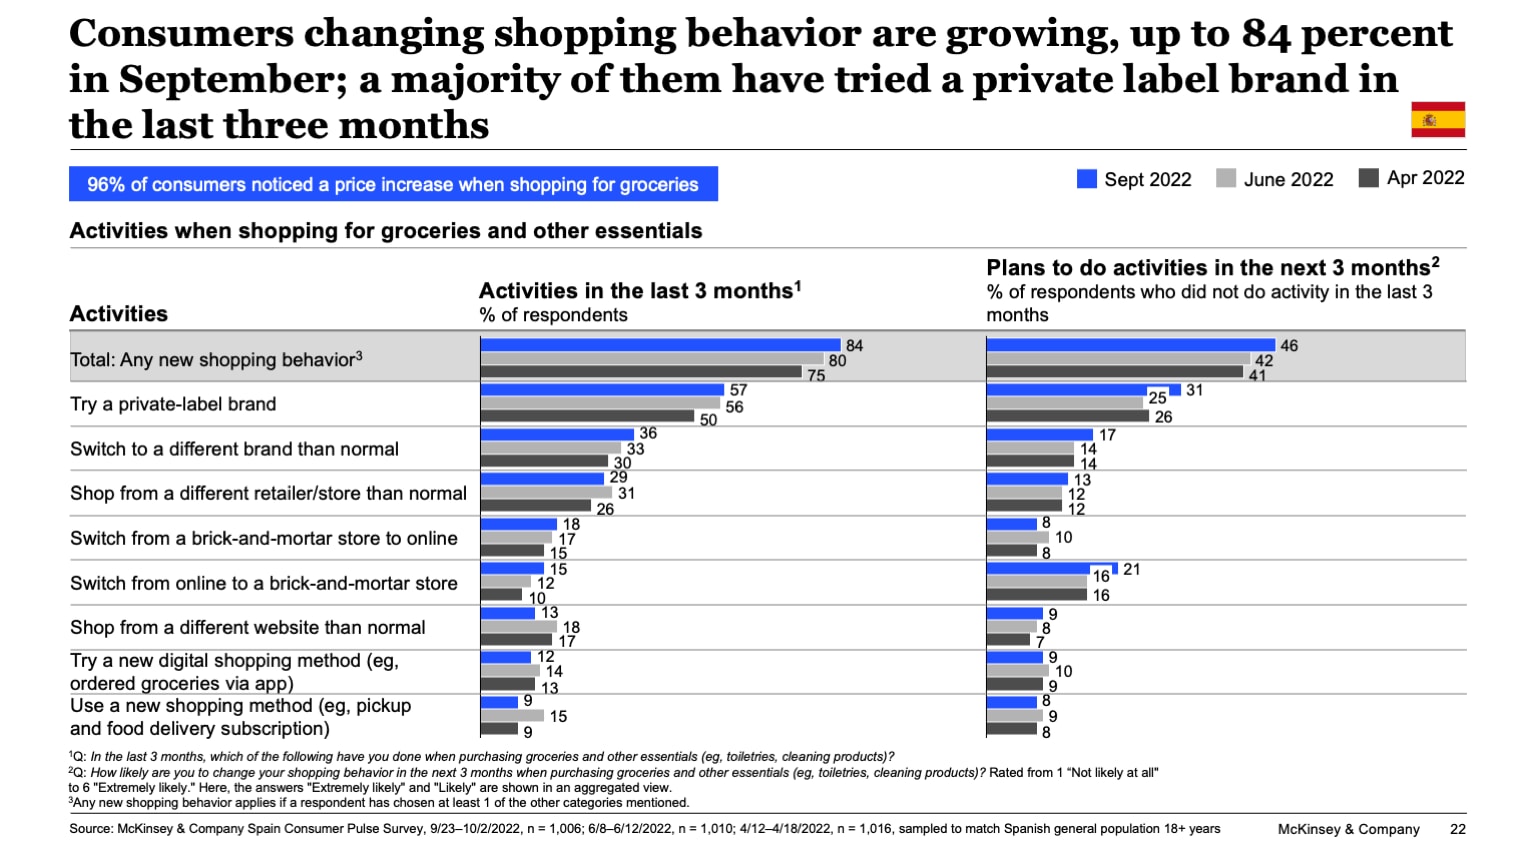 Consumers changing shopping behavior are growing, up to 84 percent in September; a majority of them have tried a private label brand in the last three months